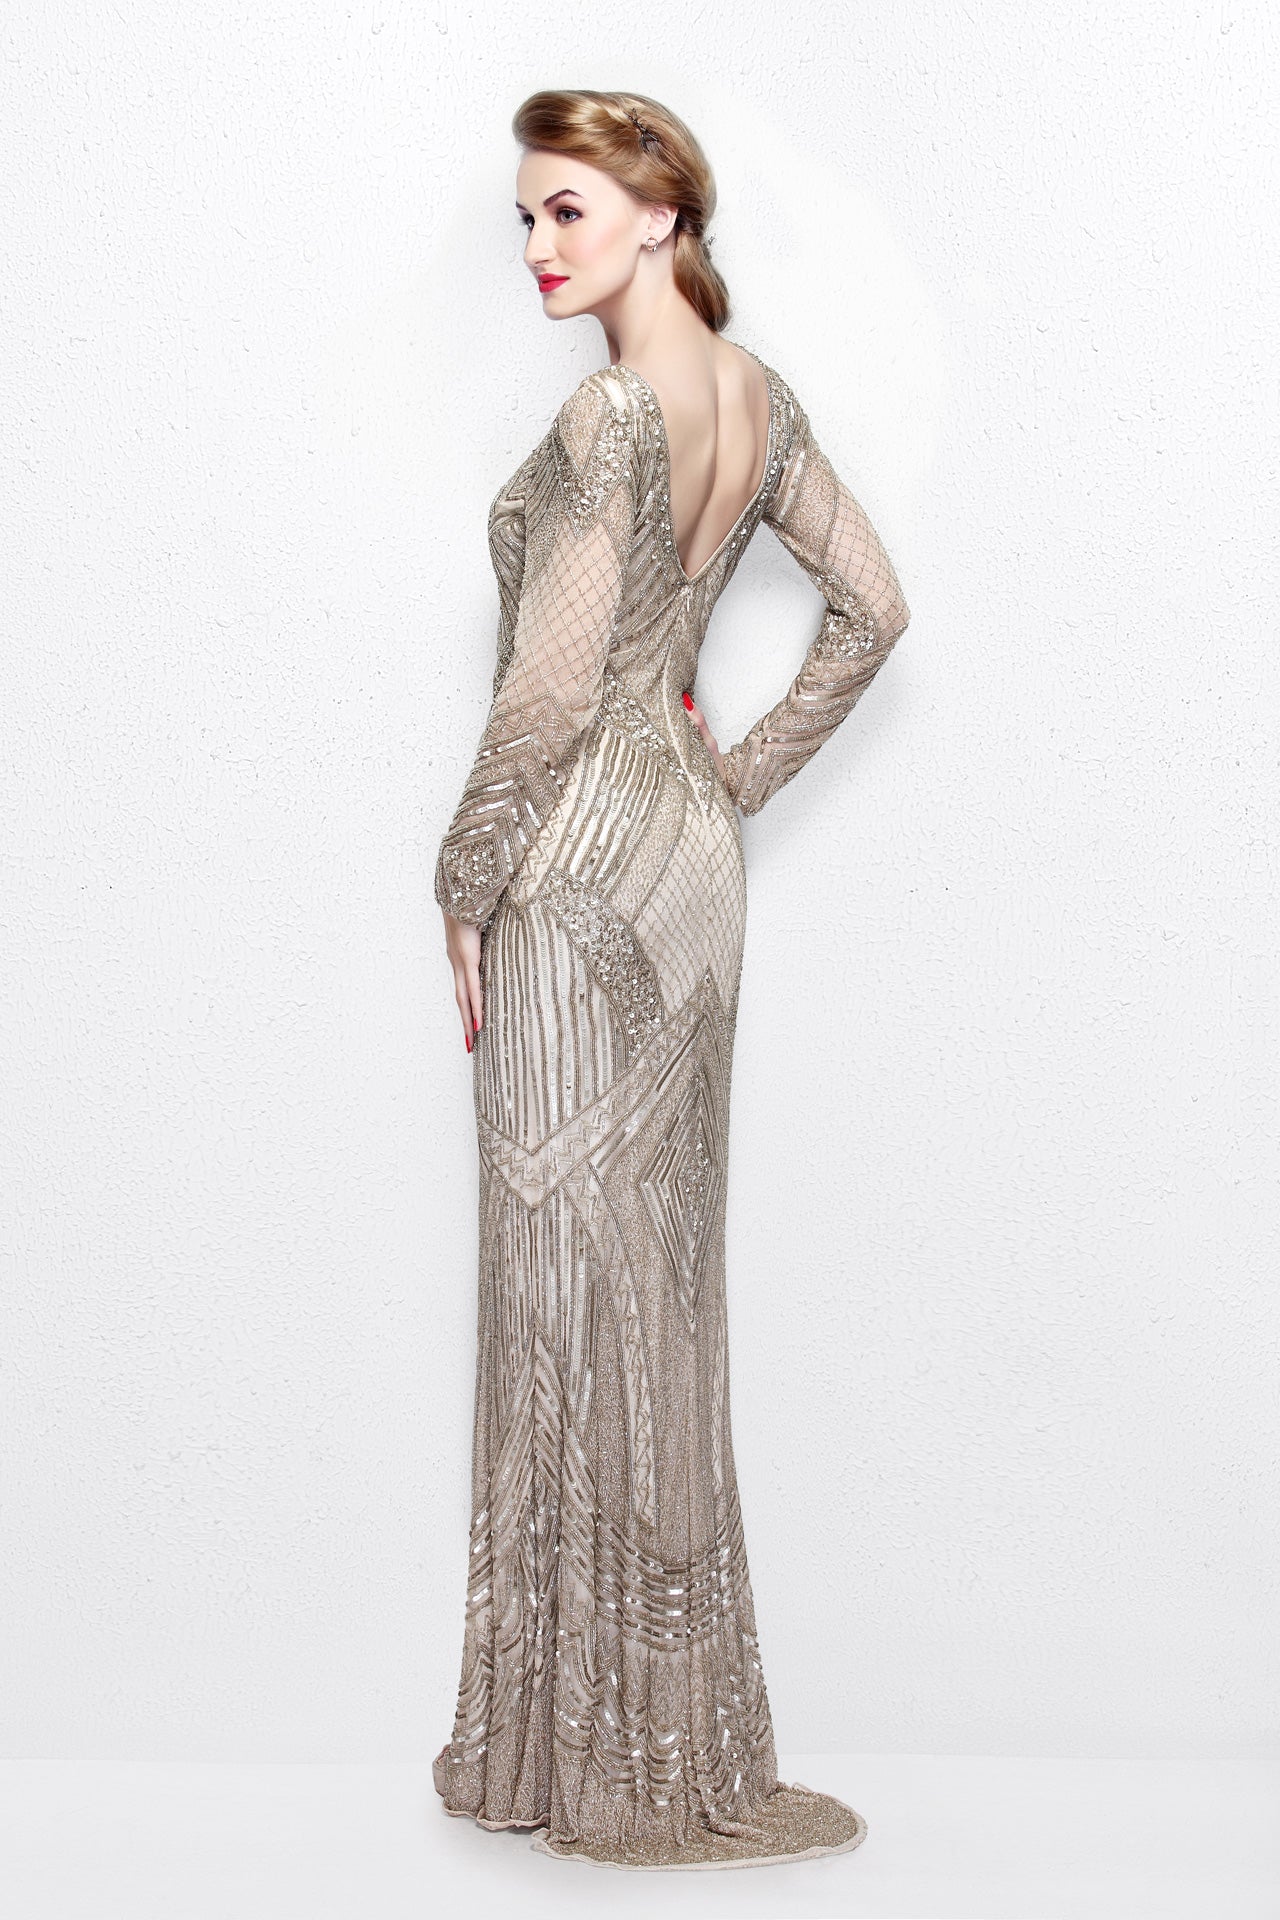 Primavera Couture 1740 Size 4, 18 Champagne long sleeve beaded dress formal evening gown mother of